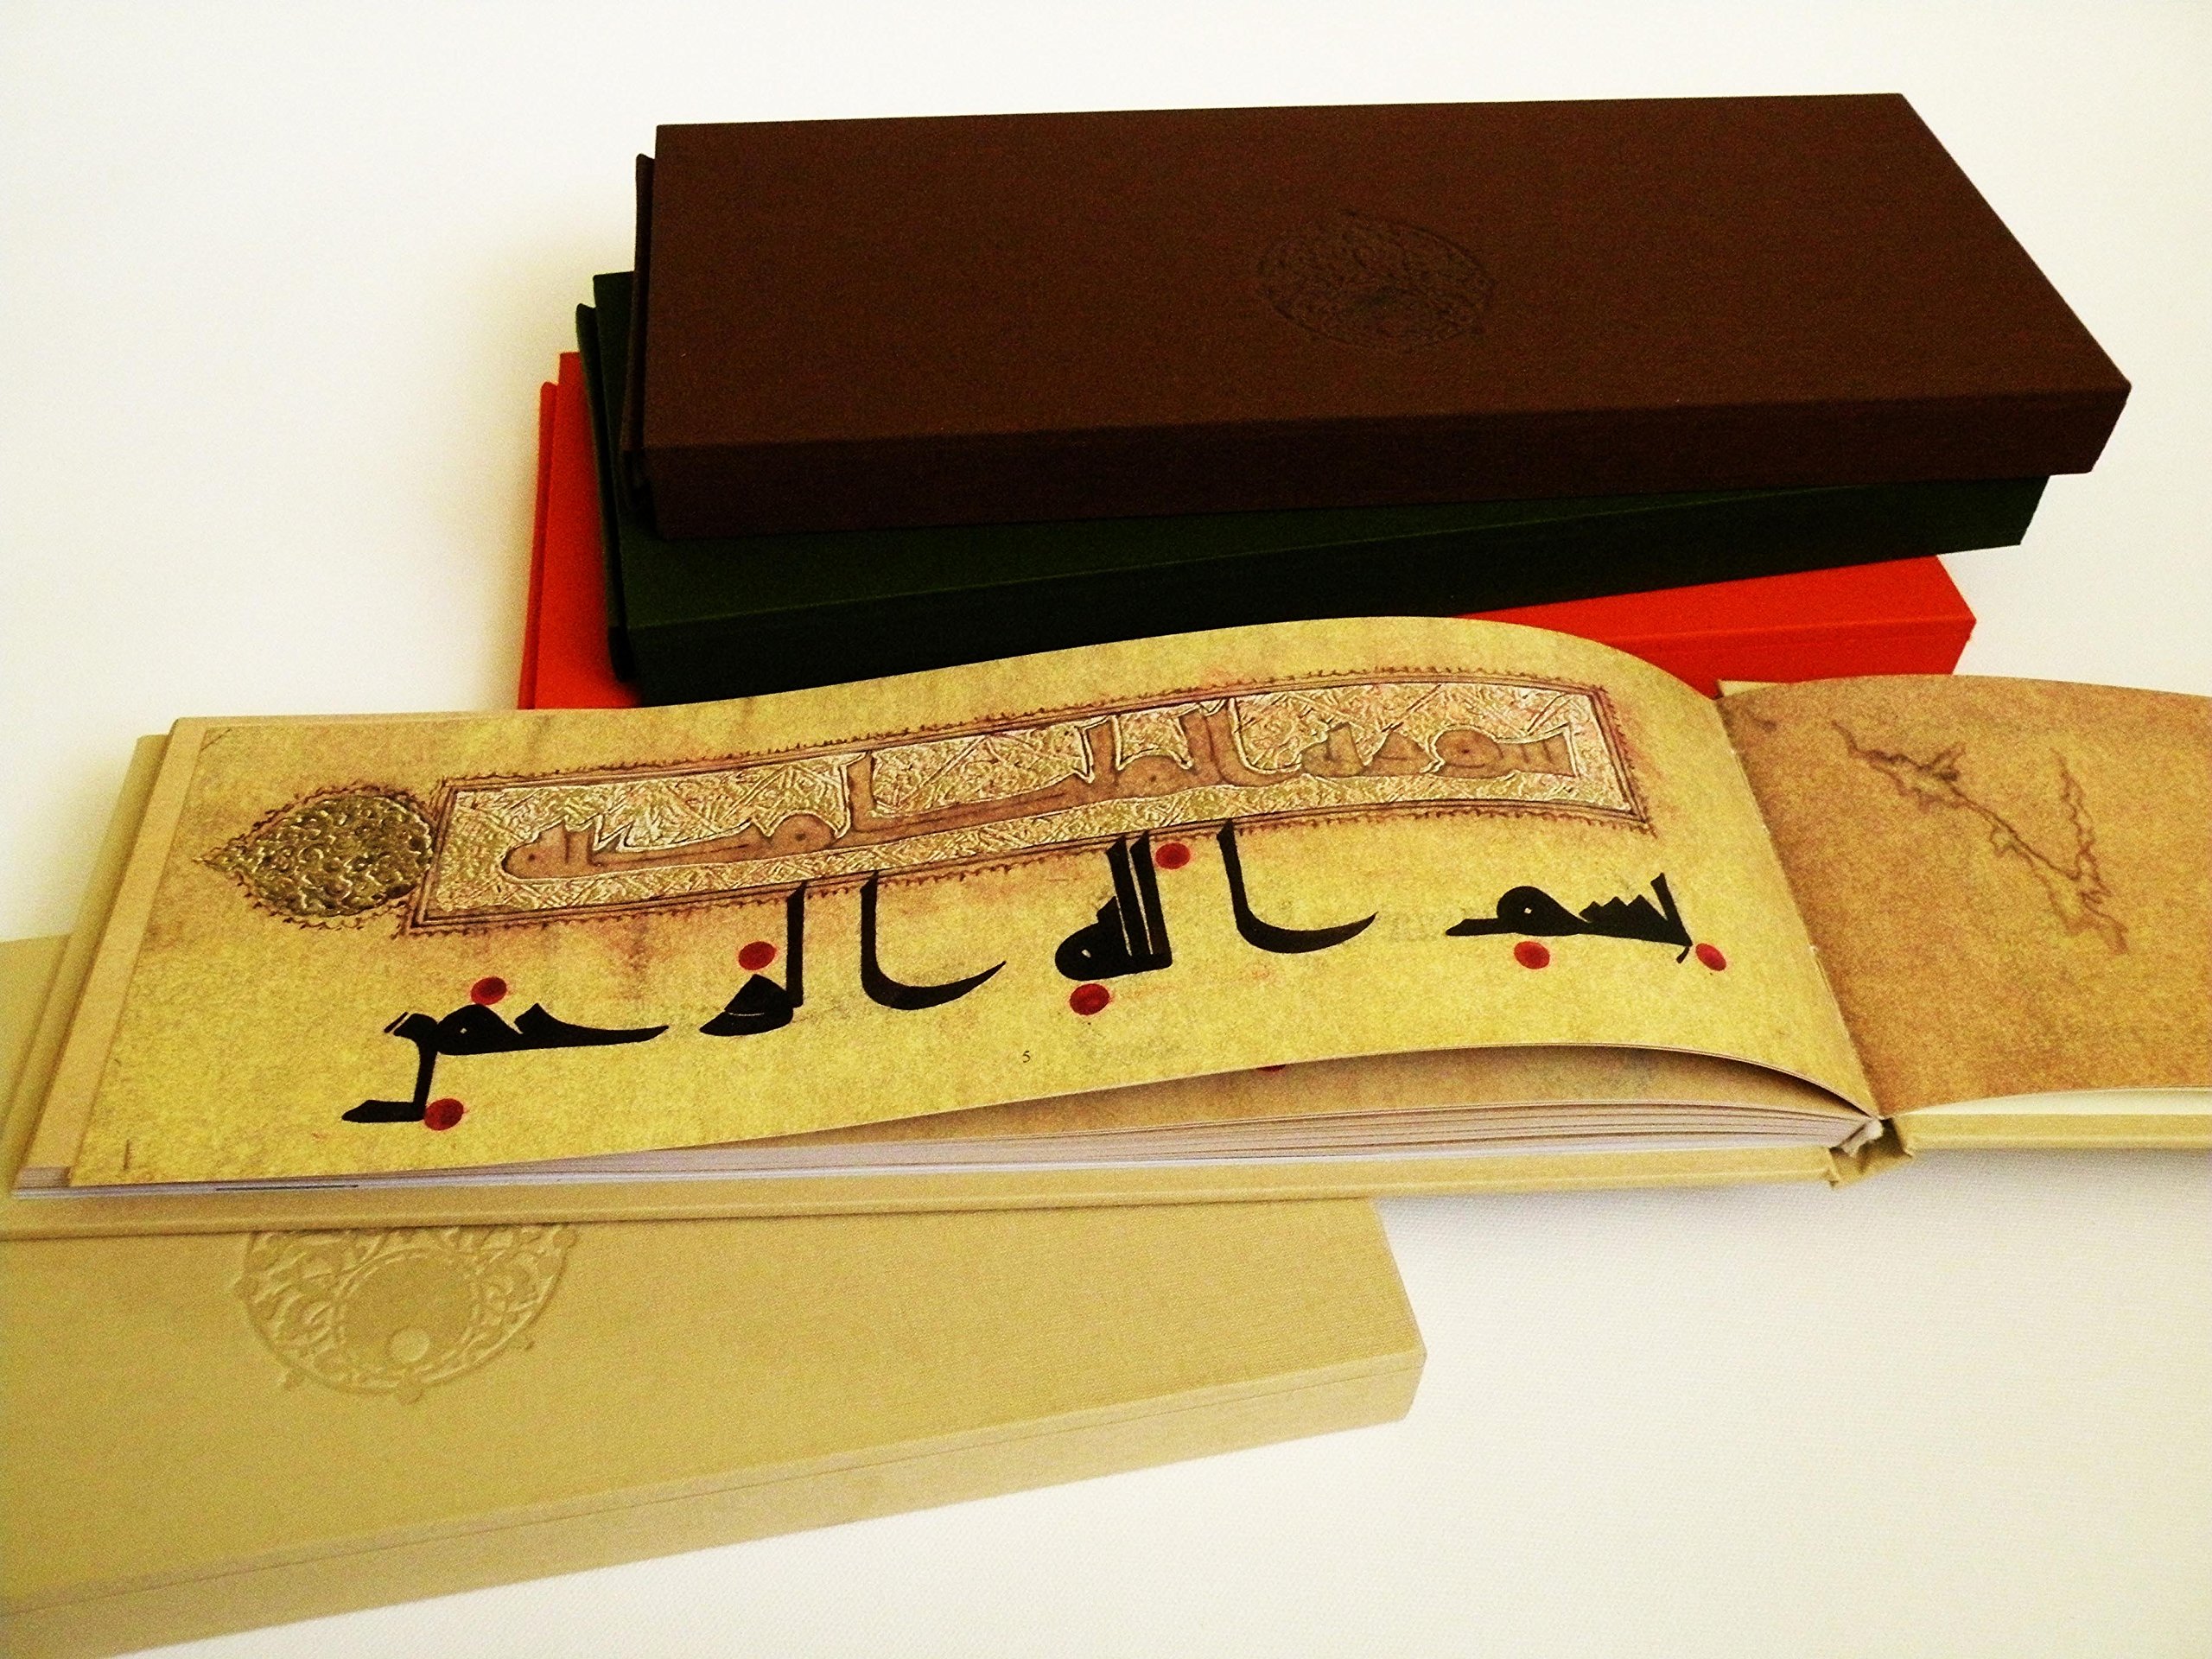 Calligraphy of the opening of Surat al-Mulk, including the title of the sūrah and the basmalah.